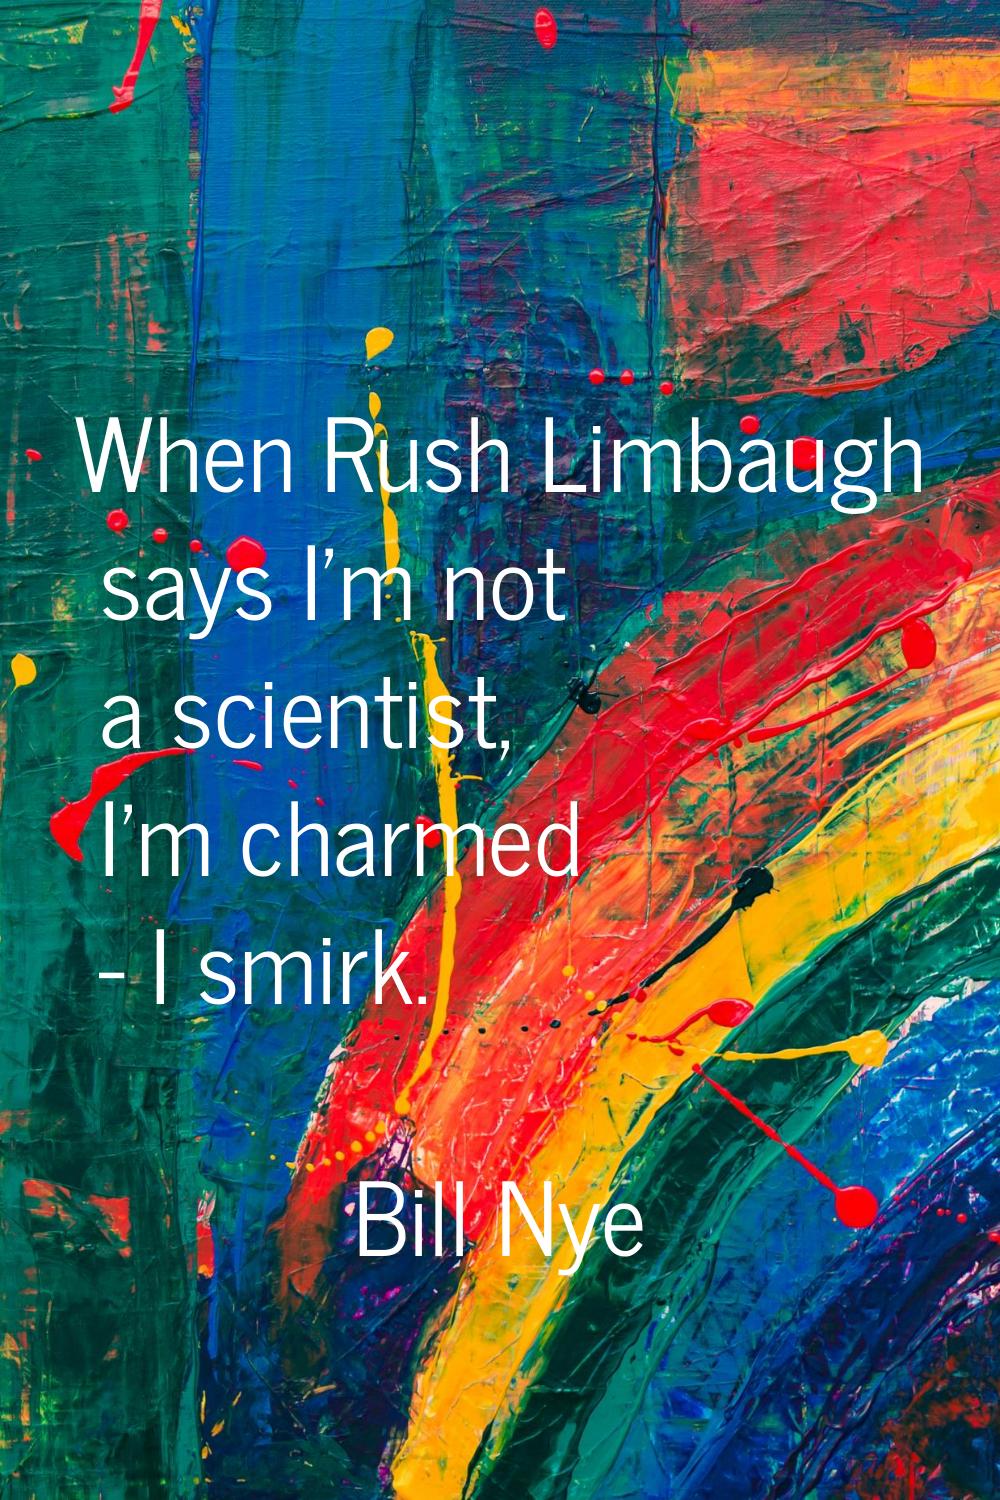 When Rush Limbaugh says I'm not a scientist, I'm charmed - I smirk.